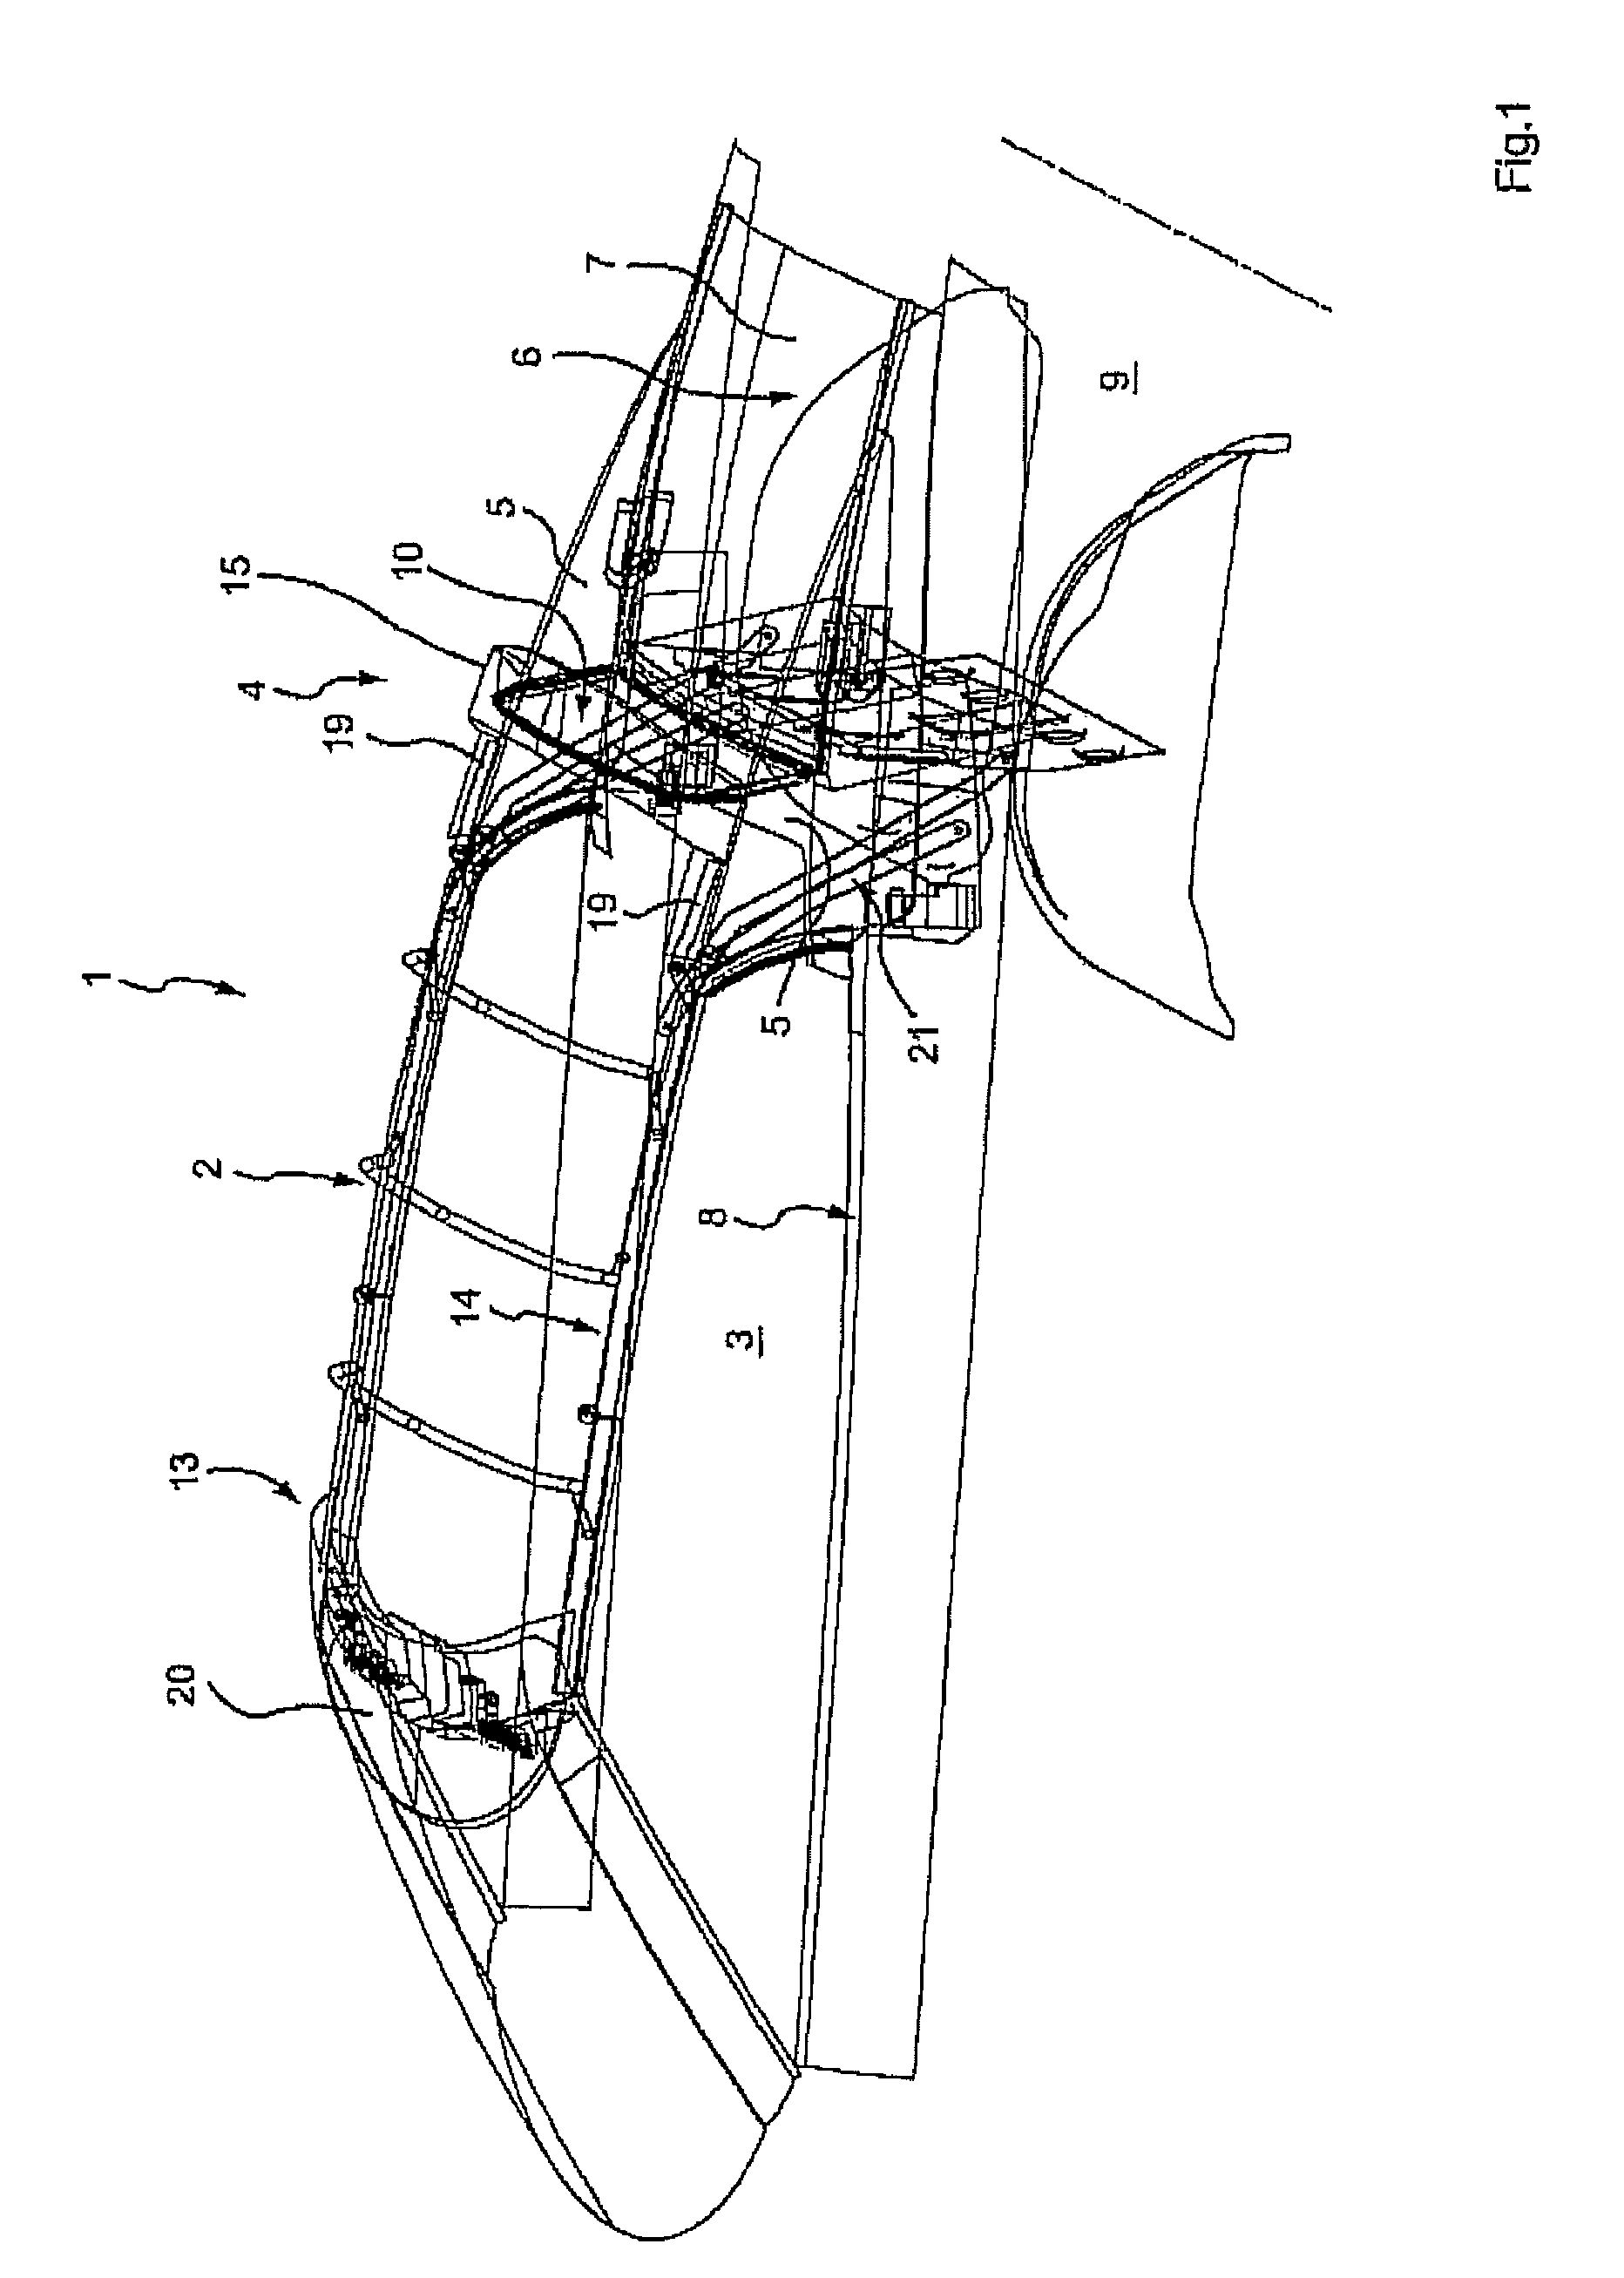 Motor vehicle having a movable roof assembly